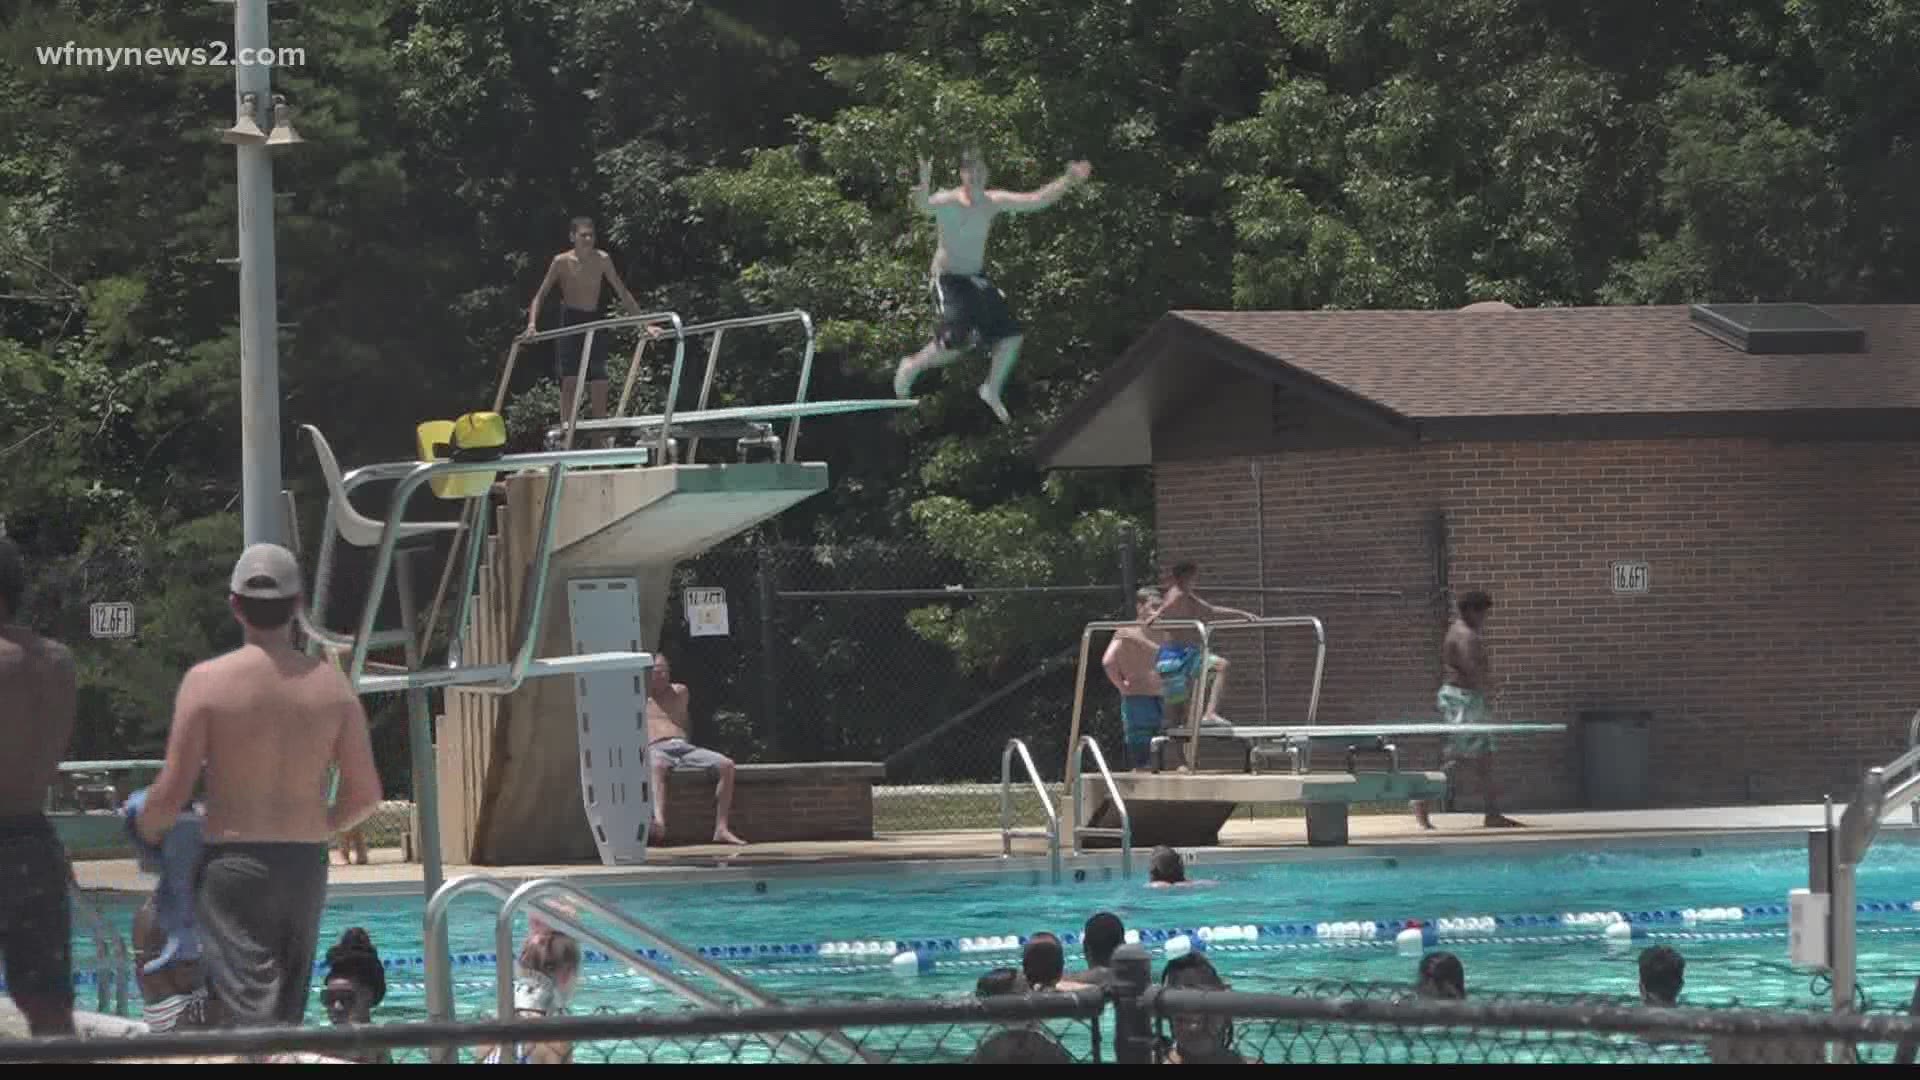 Some pools in the Triad are opening, and others are closed for the season. City officials around the Triad explain the decision and safety measures in place.